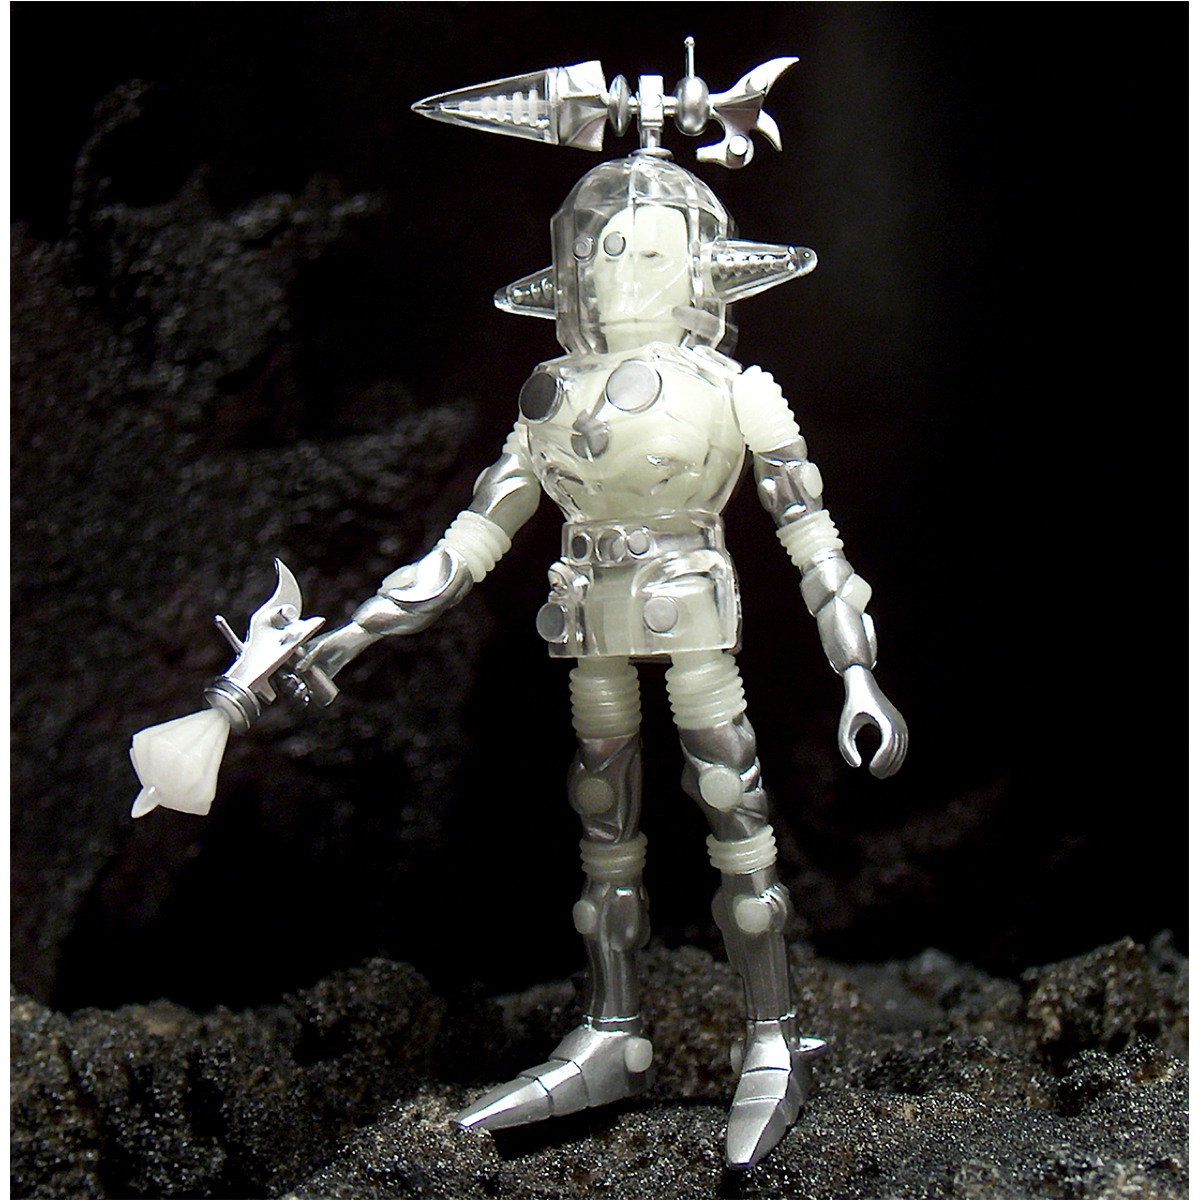 A silver GAMMA X COSMIC RADIATION action figure holding a sword on a rock.